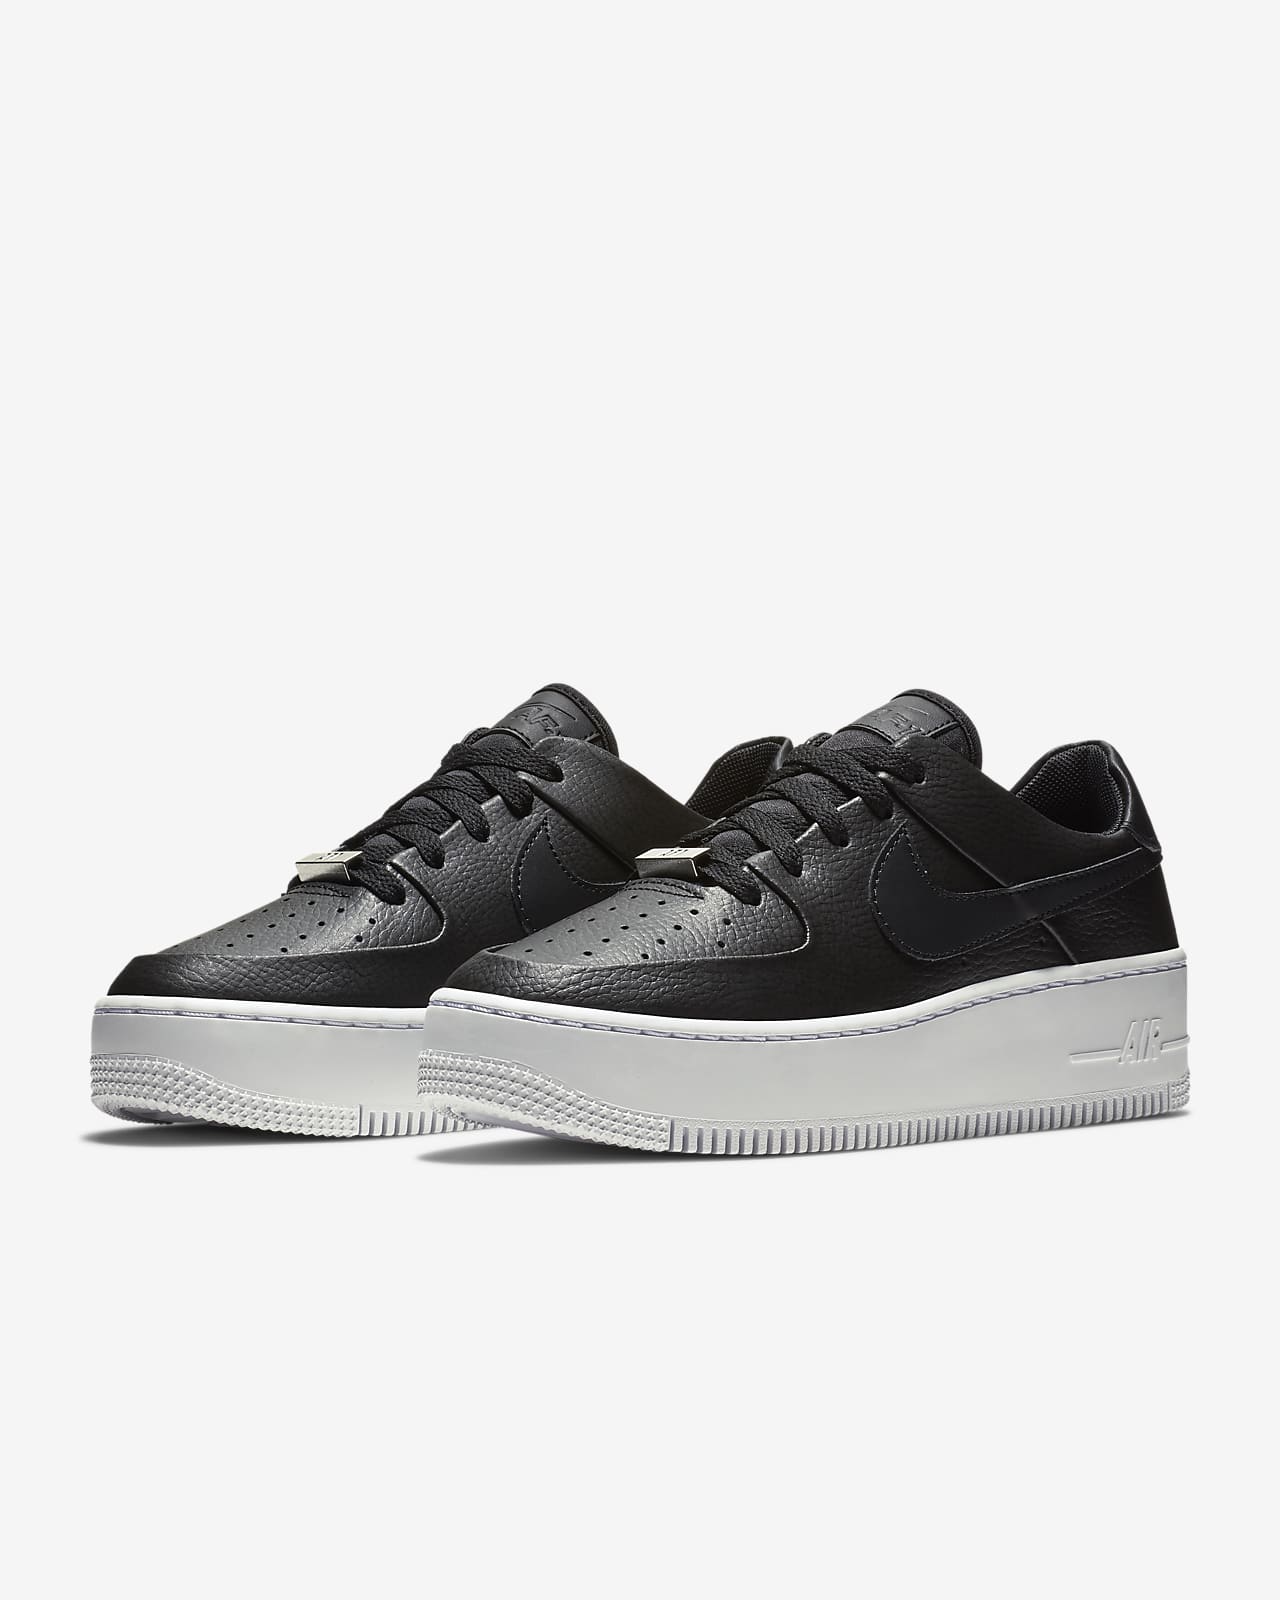 Chaussure Nike Air Force 1 Sage Low pour Femme